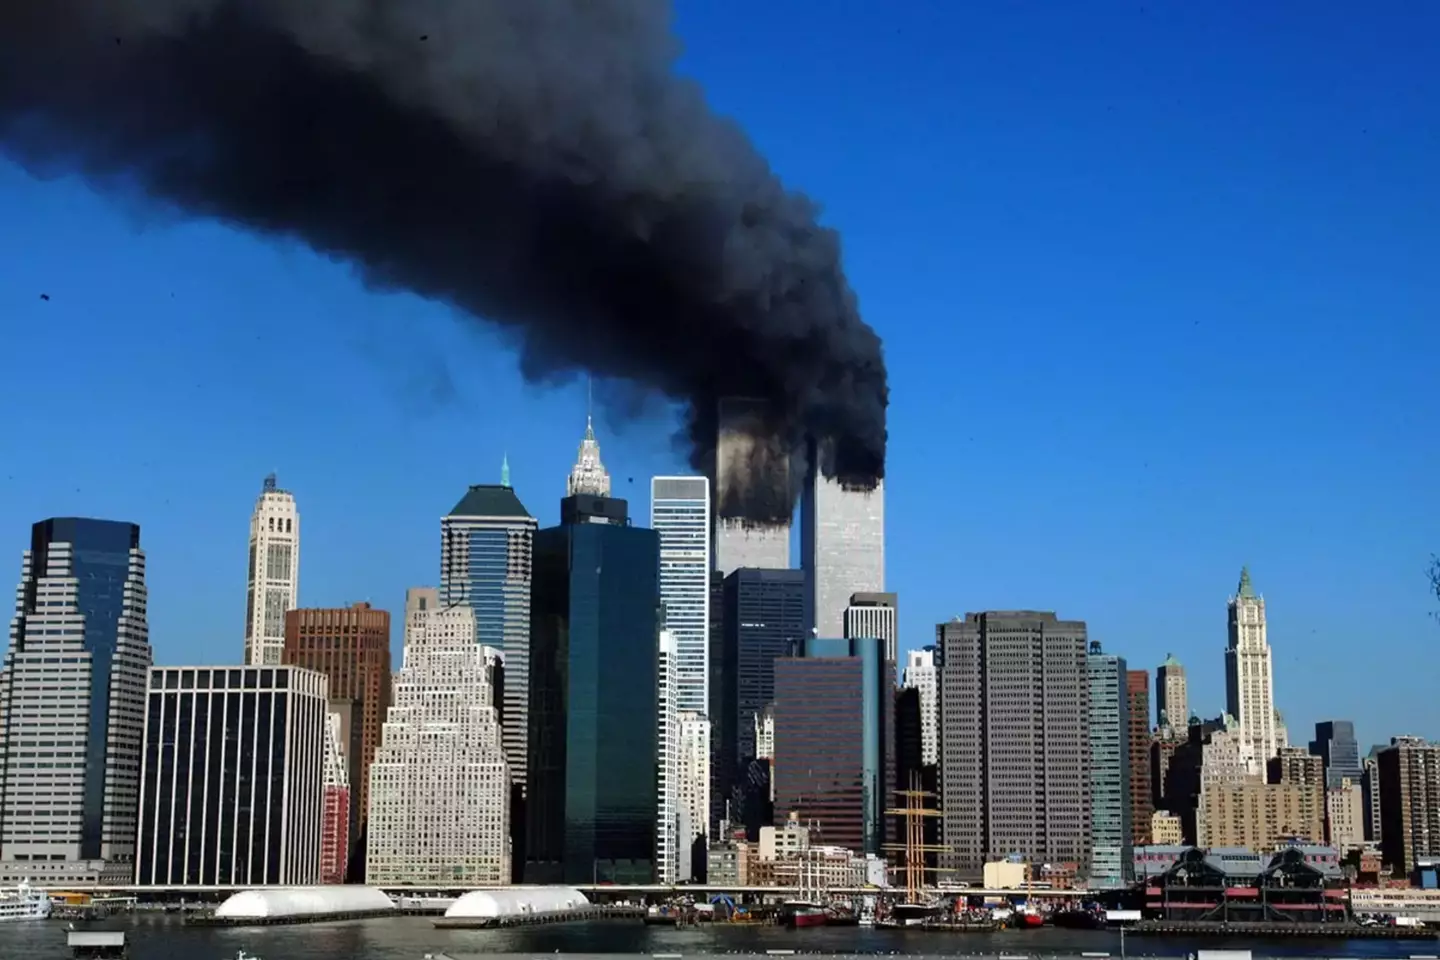 The terrorist attacks of 9/11 cost the lives of thousands. (HENNY RAY ABRAMS/AFP via Getty Images)